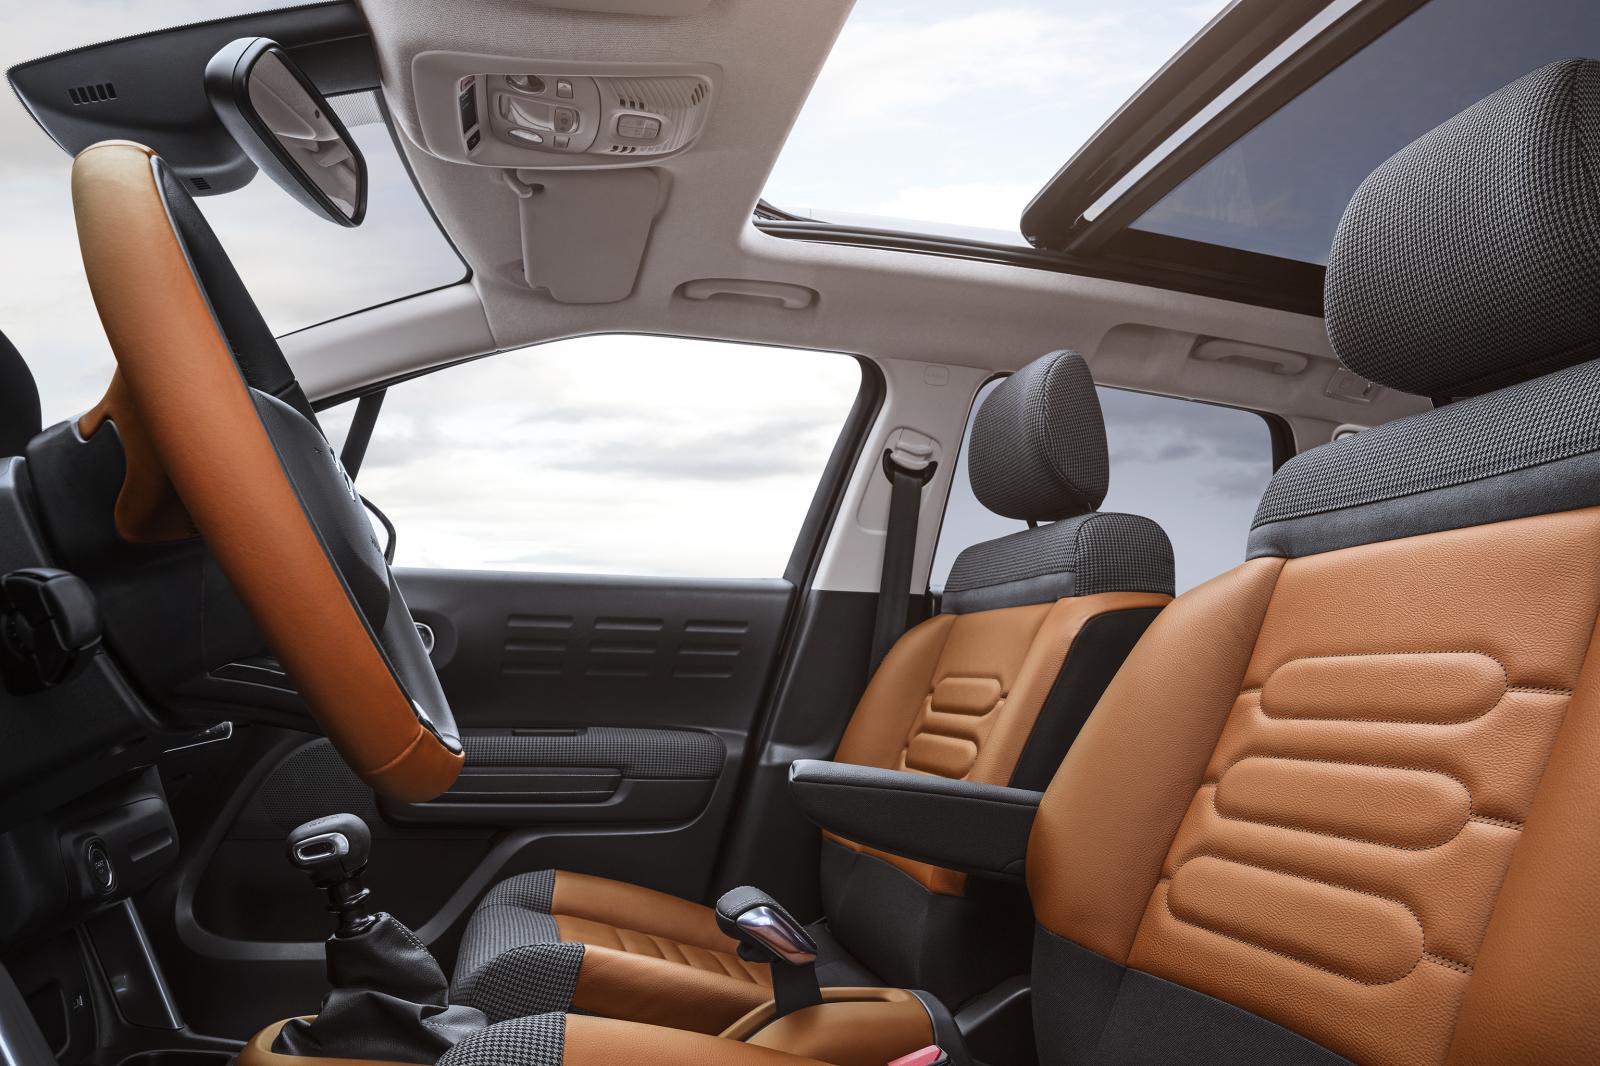 C3 Aircross Compact SUV - Front seats